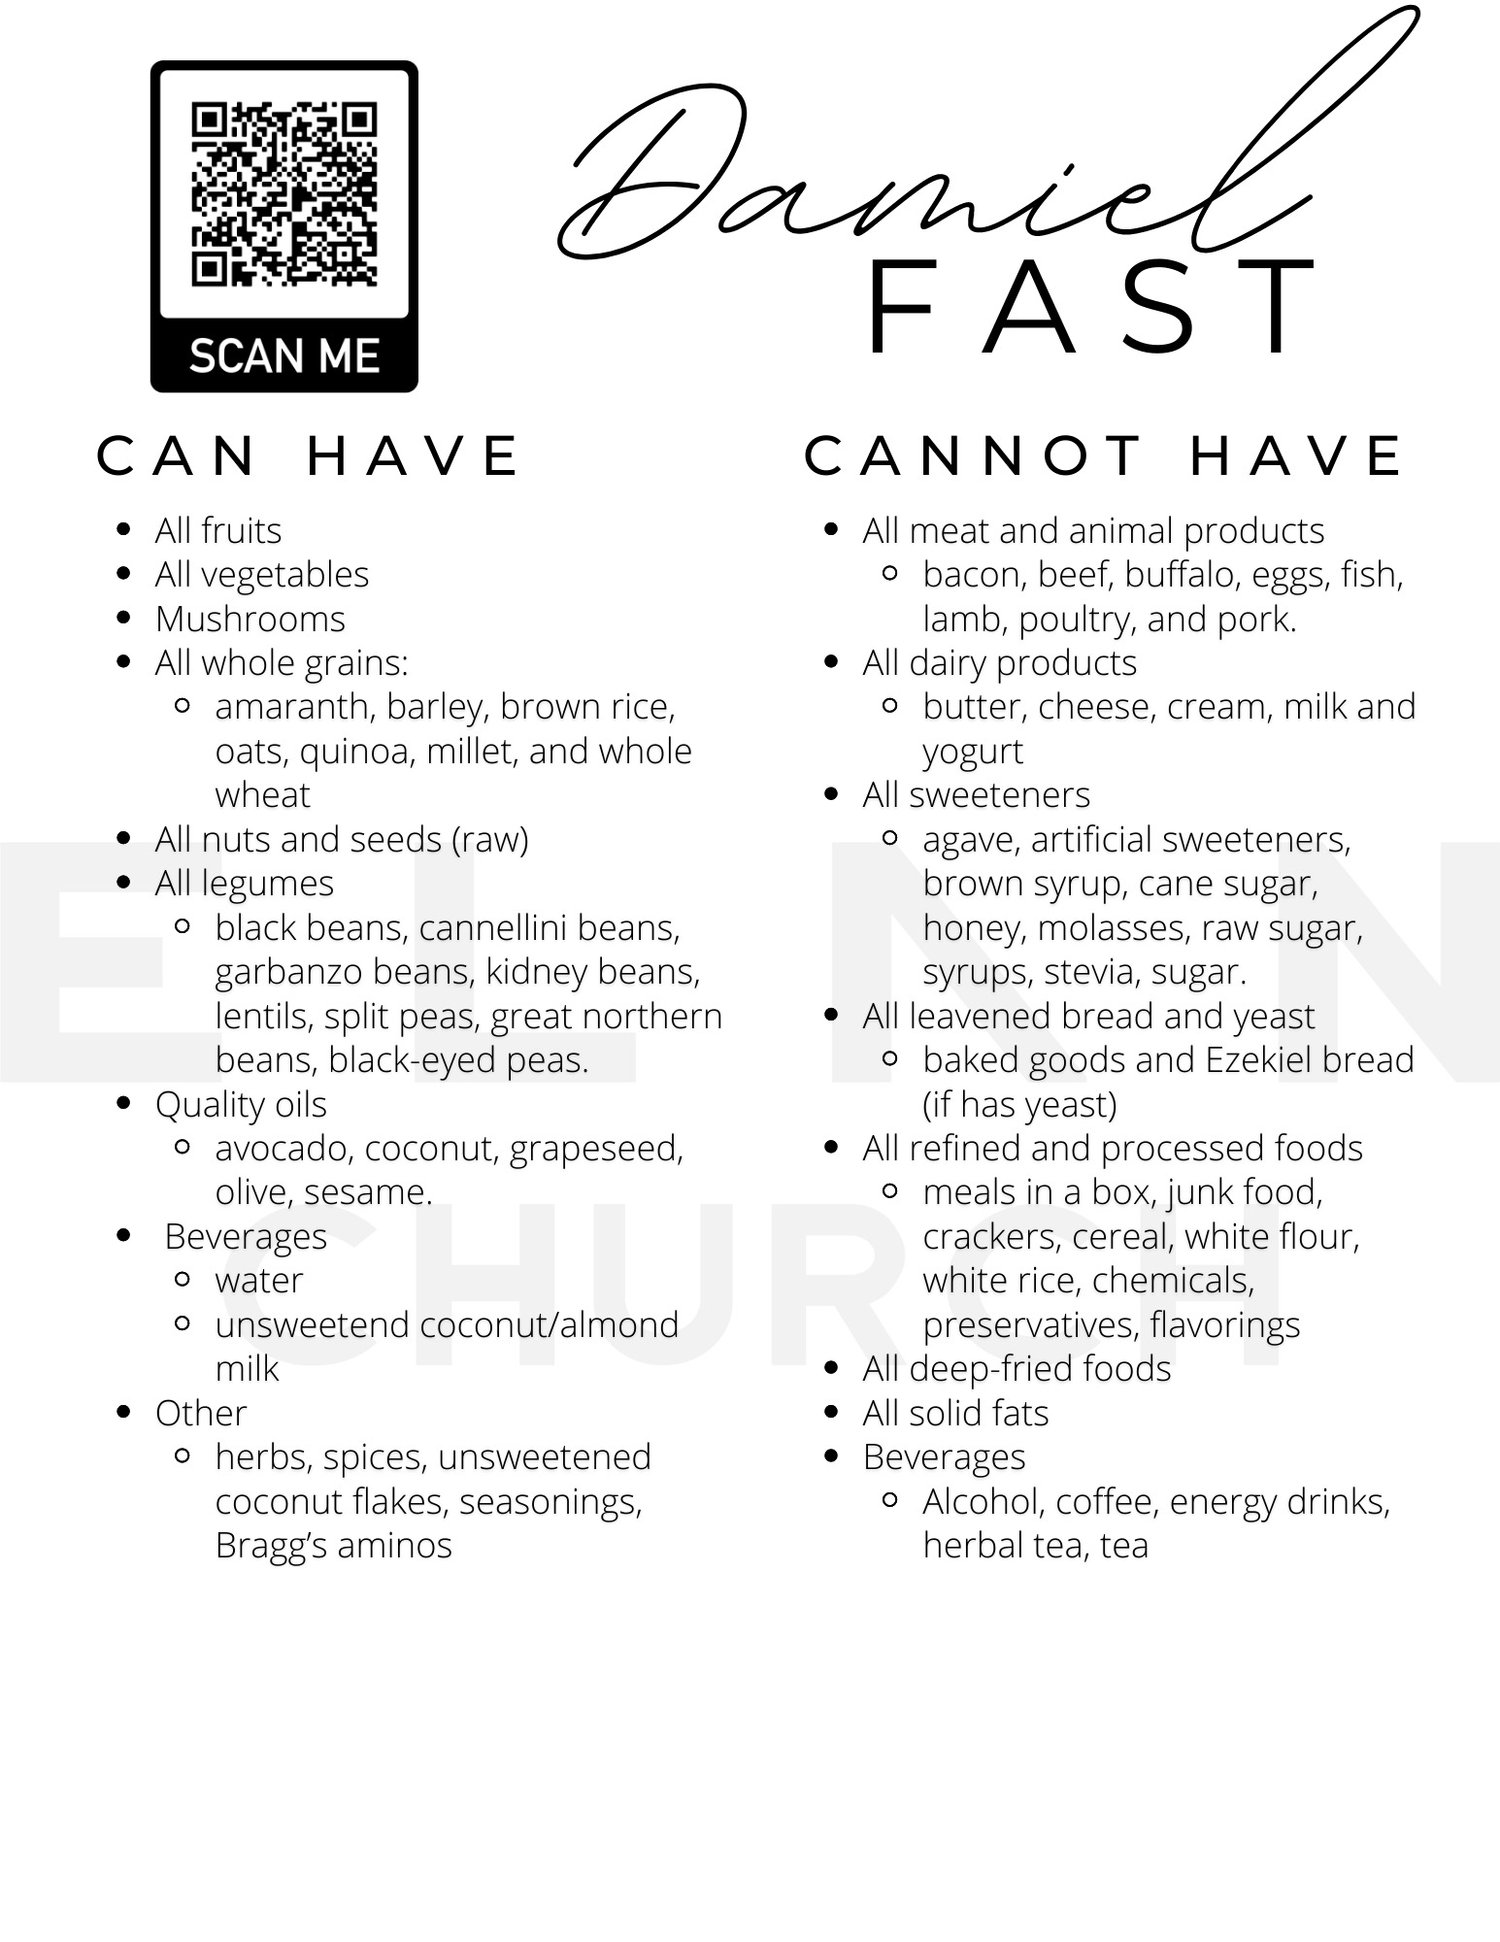 Daniel Fast foods list for 21 days of prayer and fasting